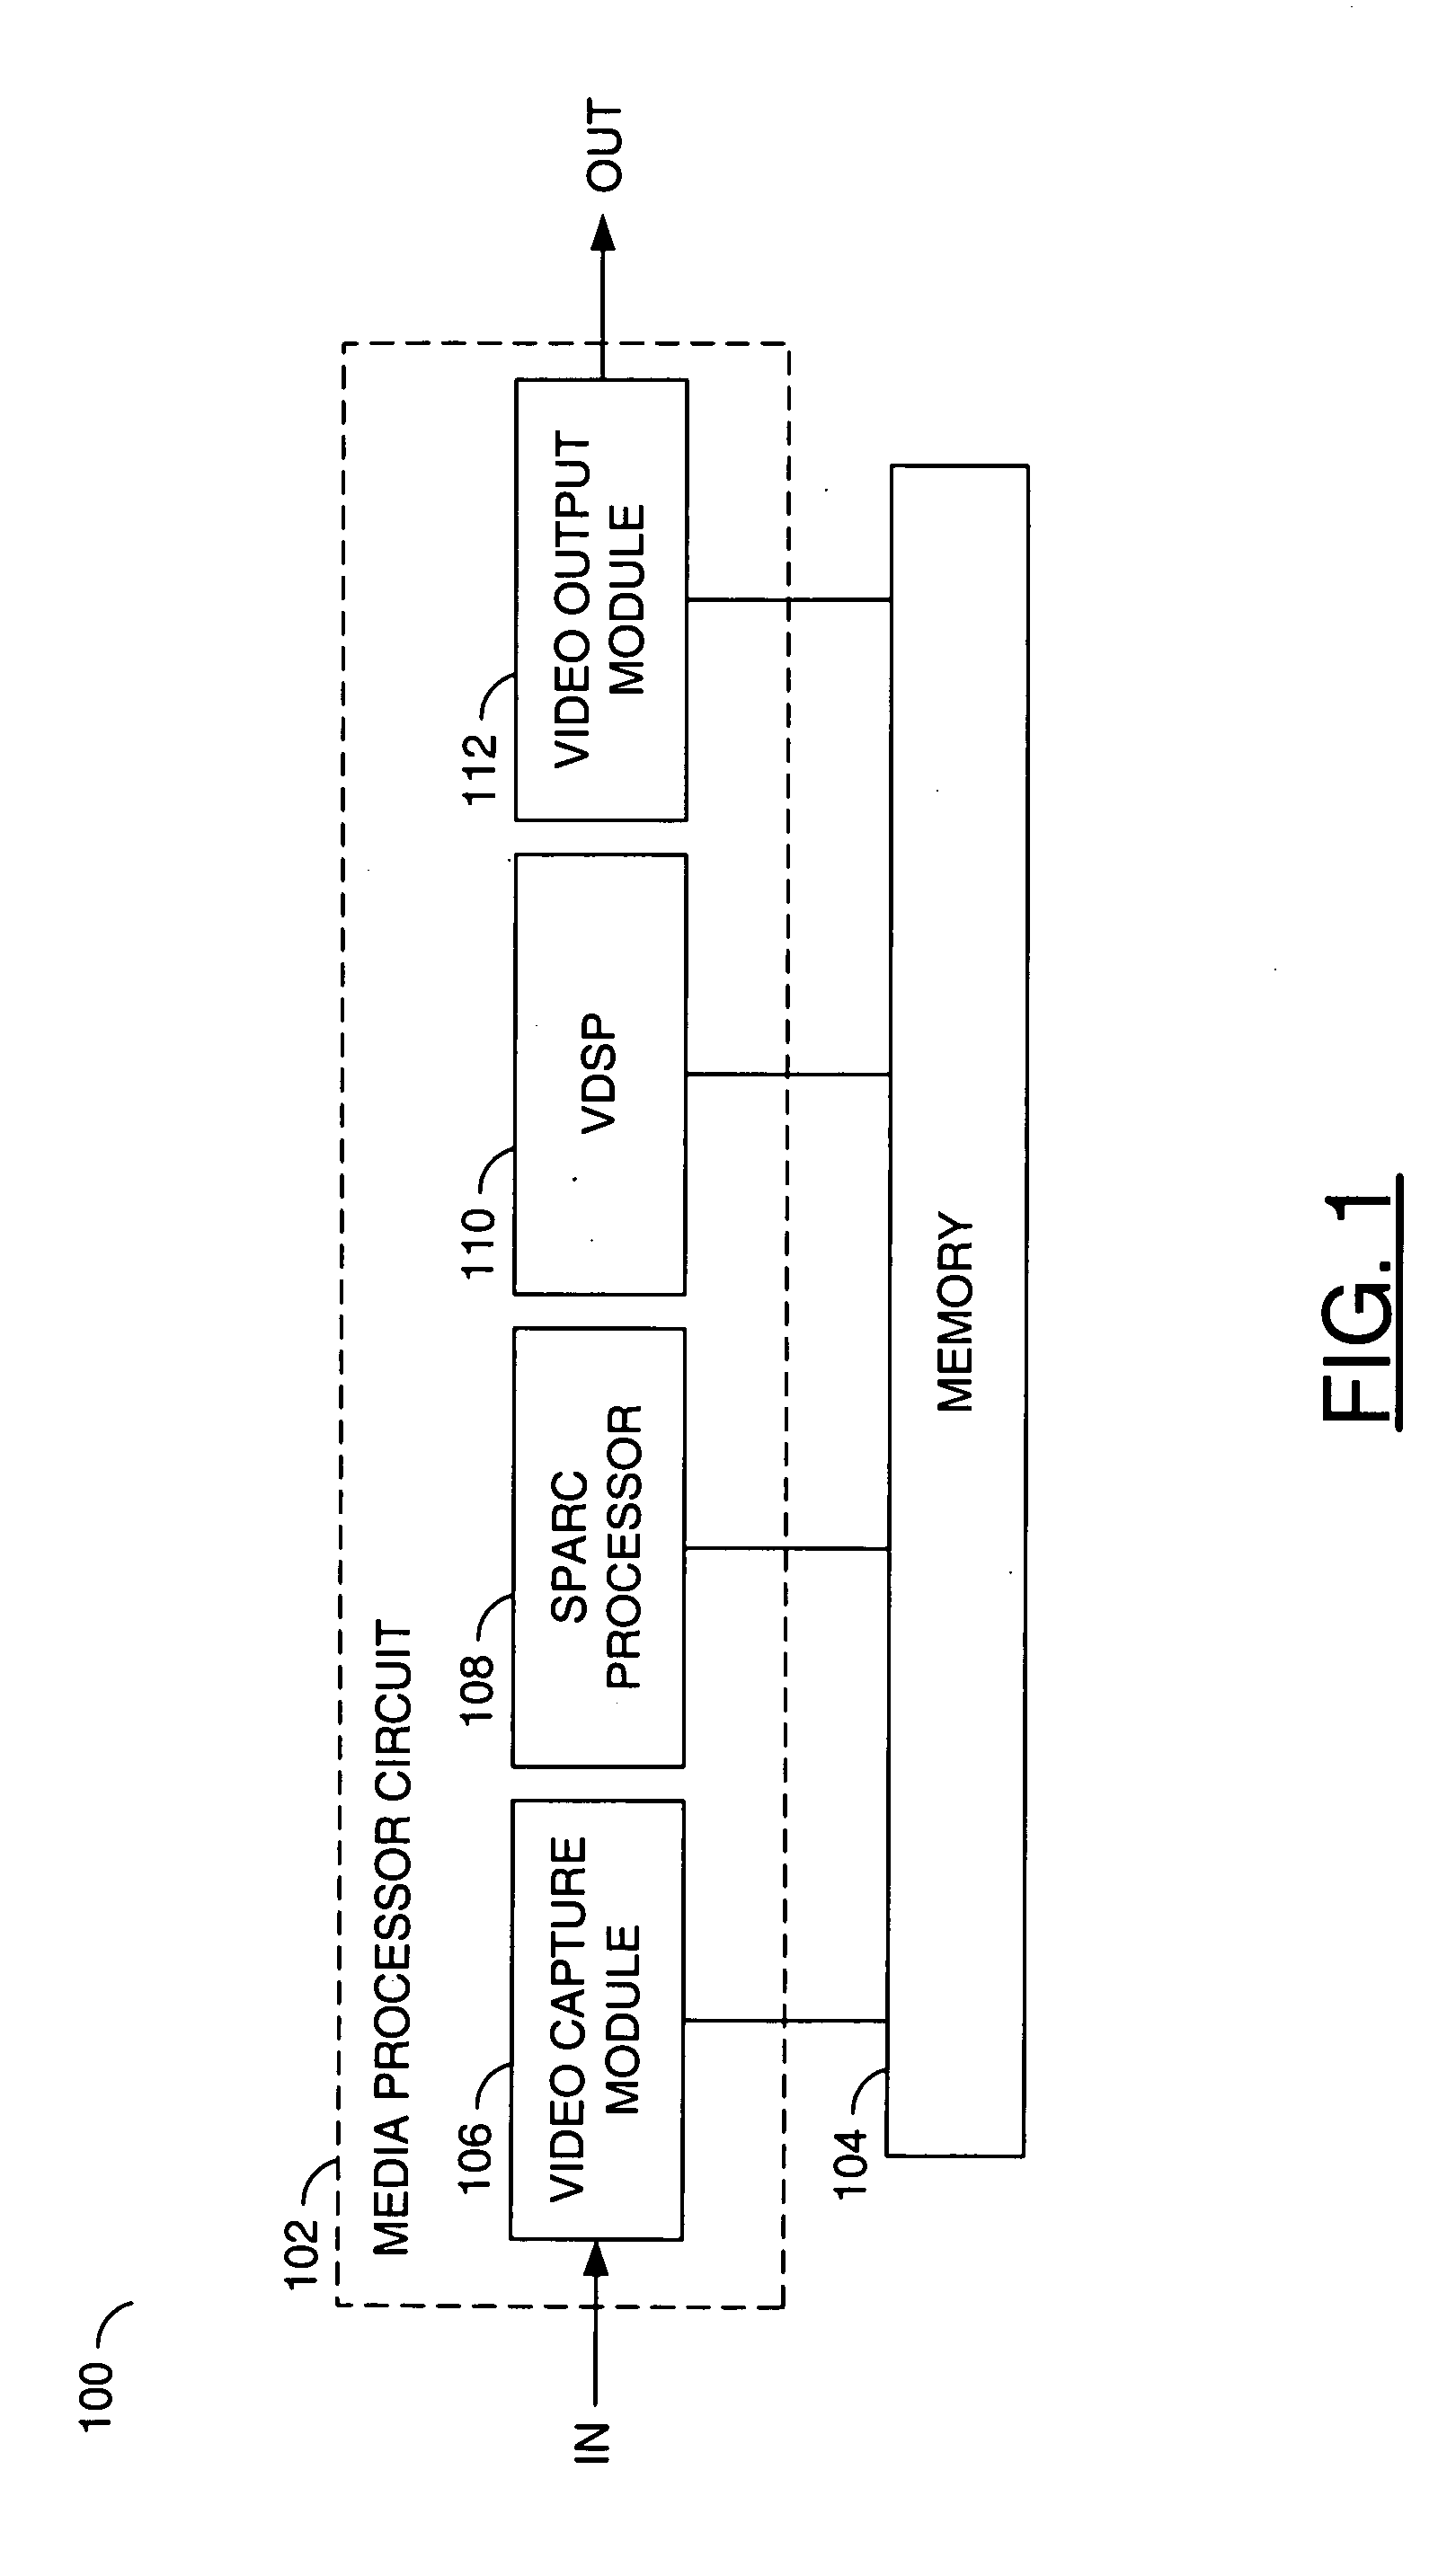 Detection of moving interlaced text for film mode decision